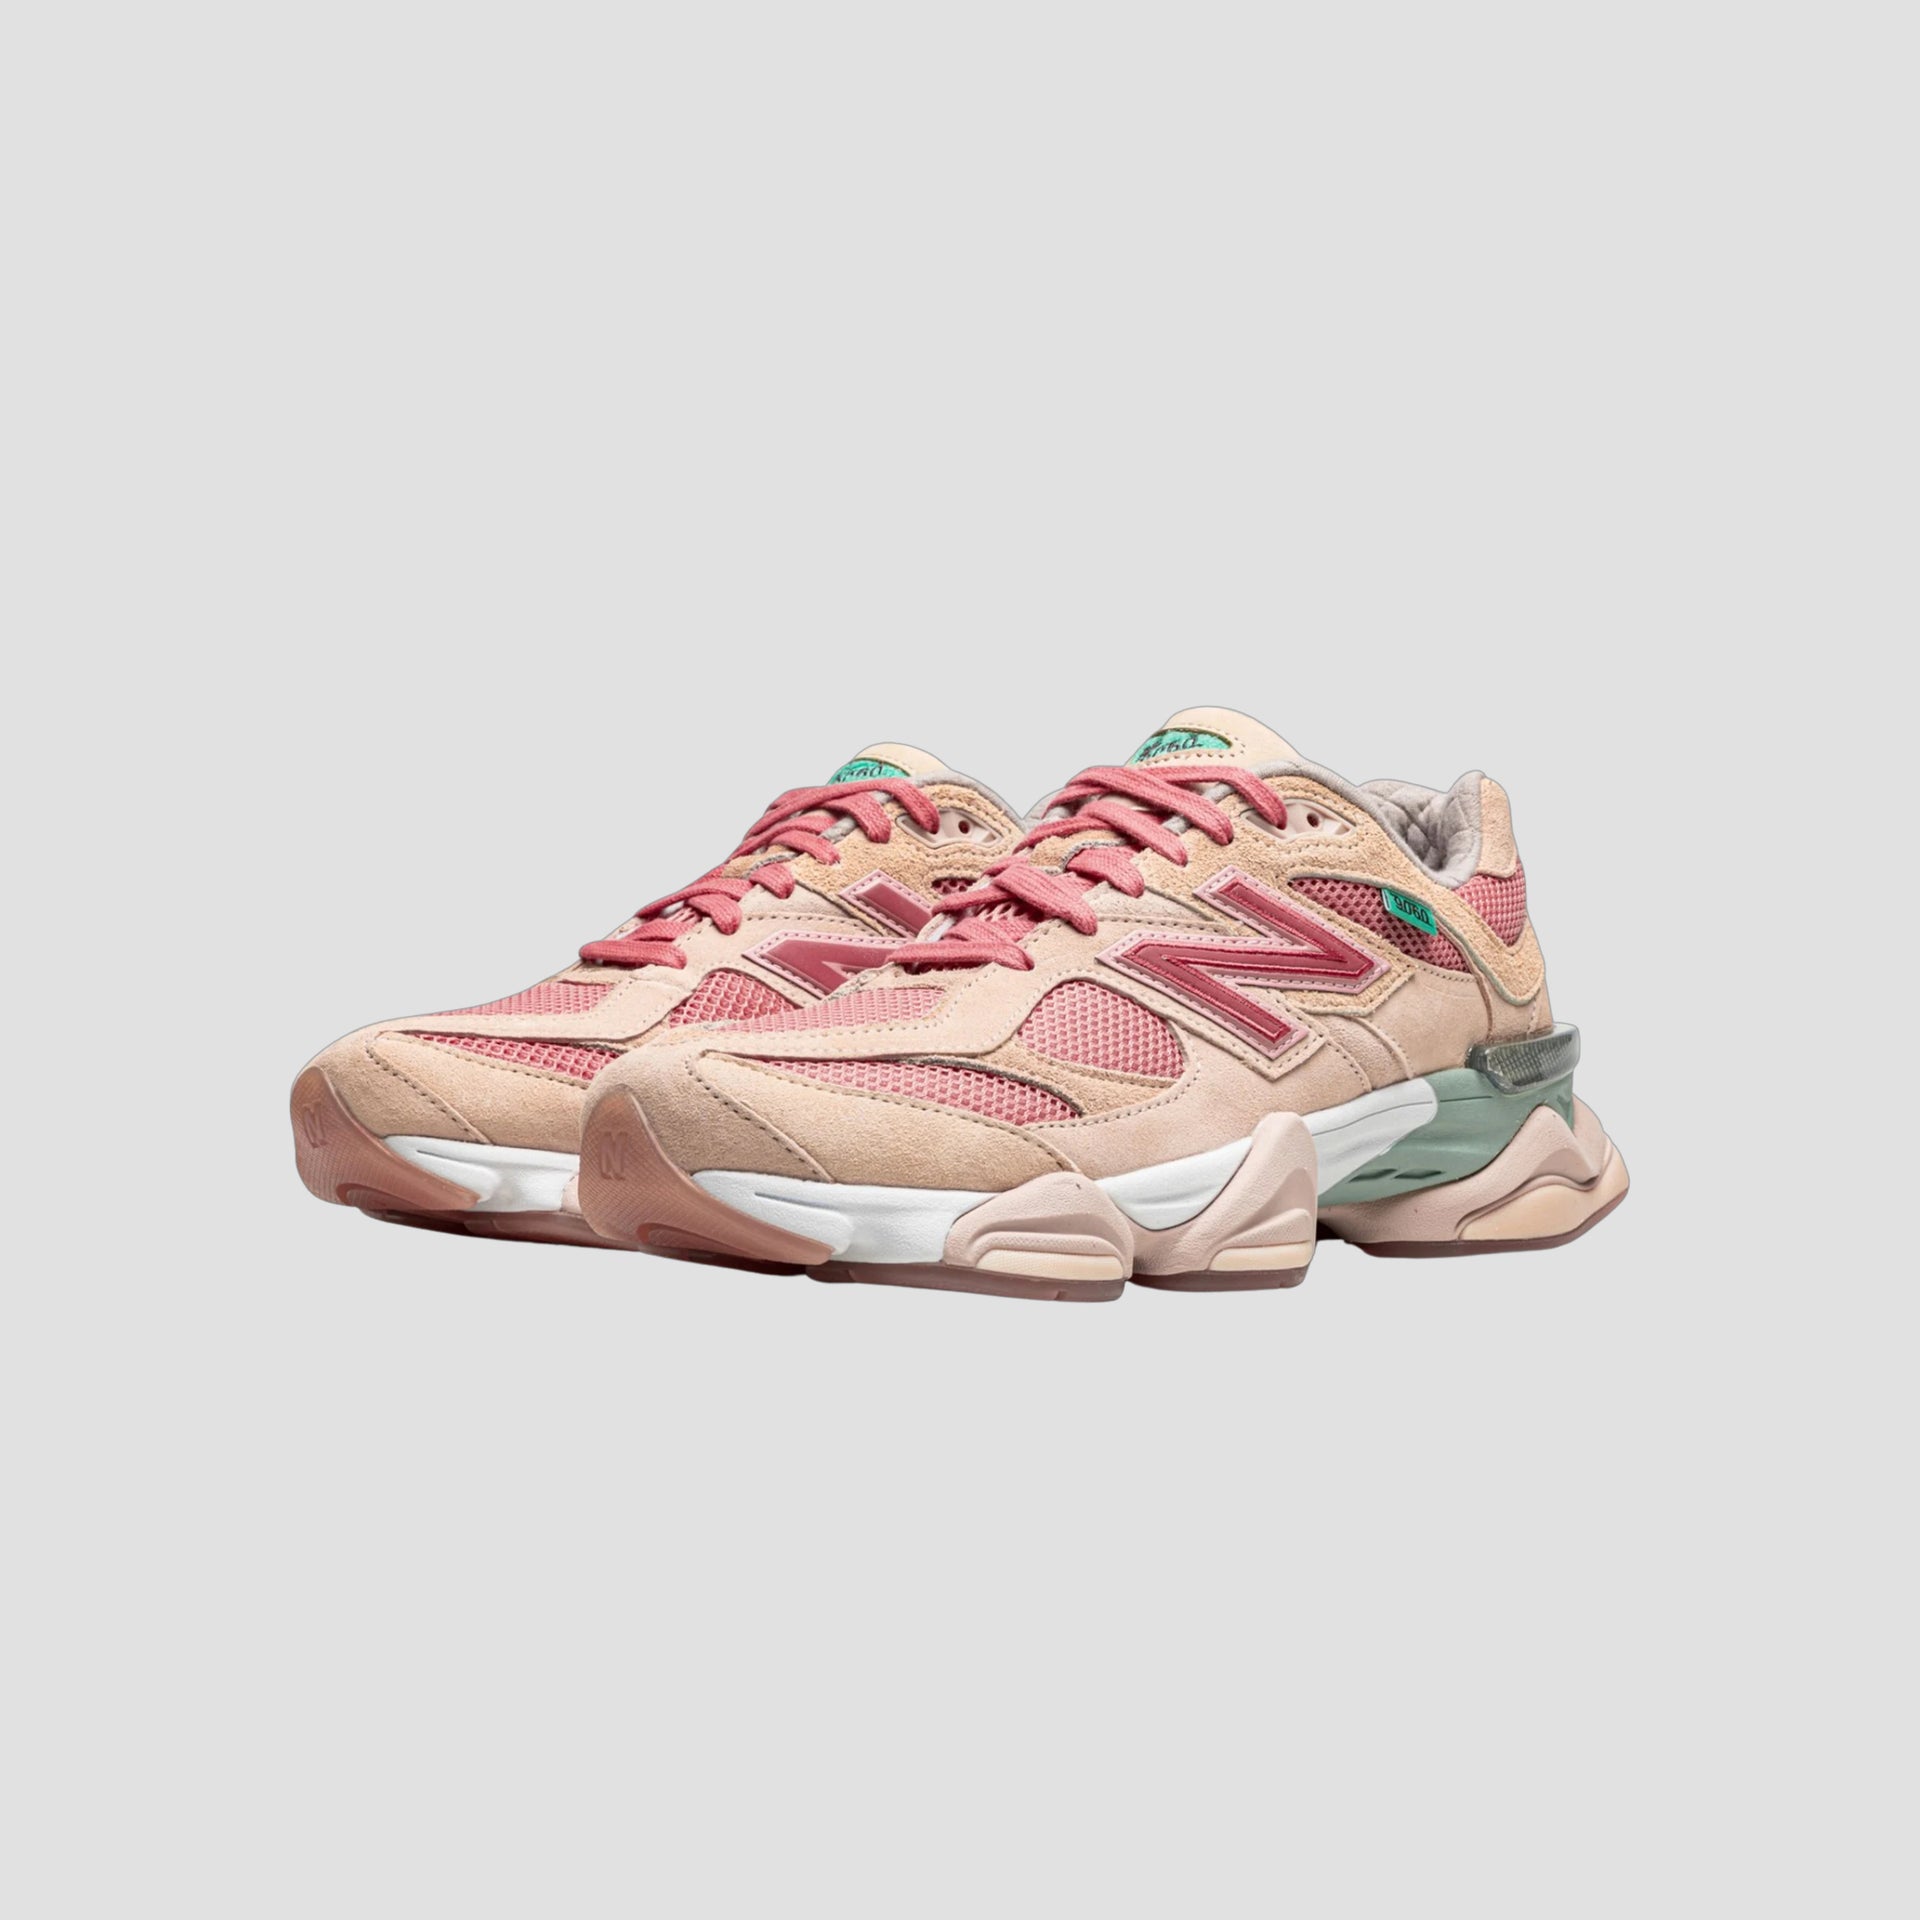 9060 "JOE FRESH GOODS - INSIDE VOICES "PENNY COOKIE PINK""